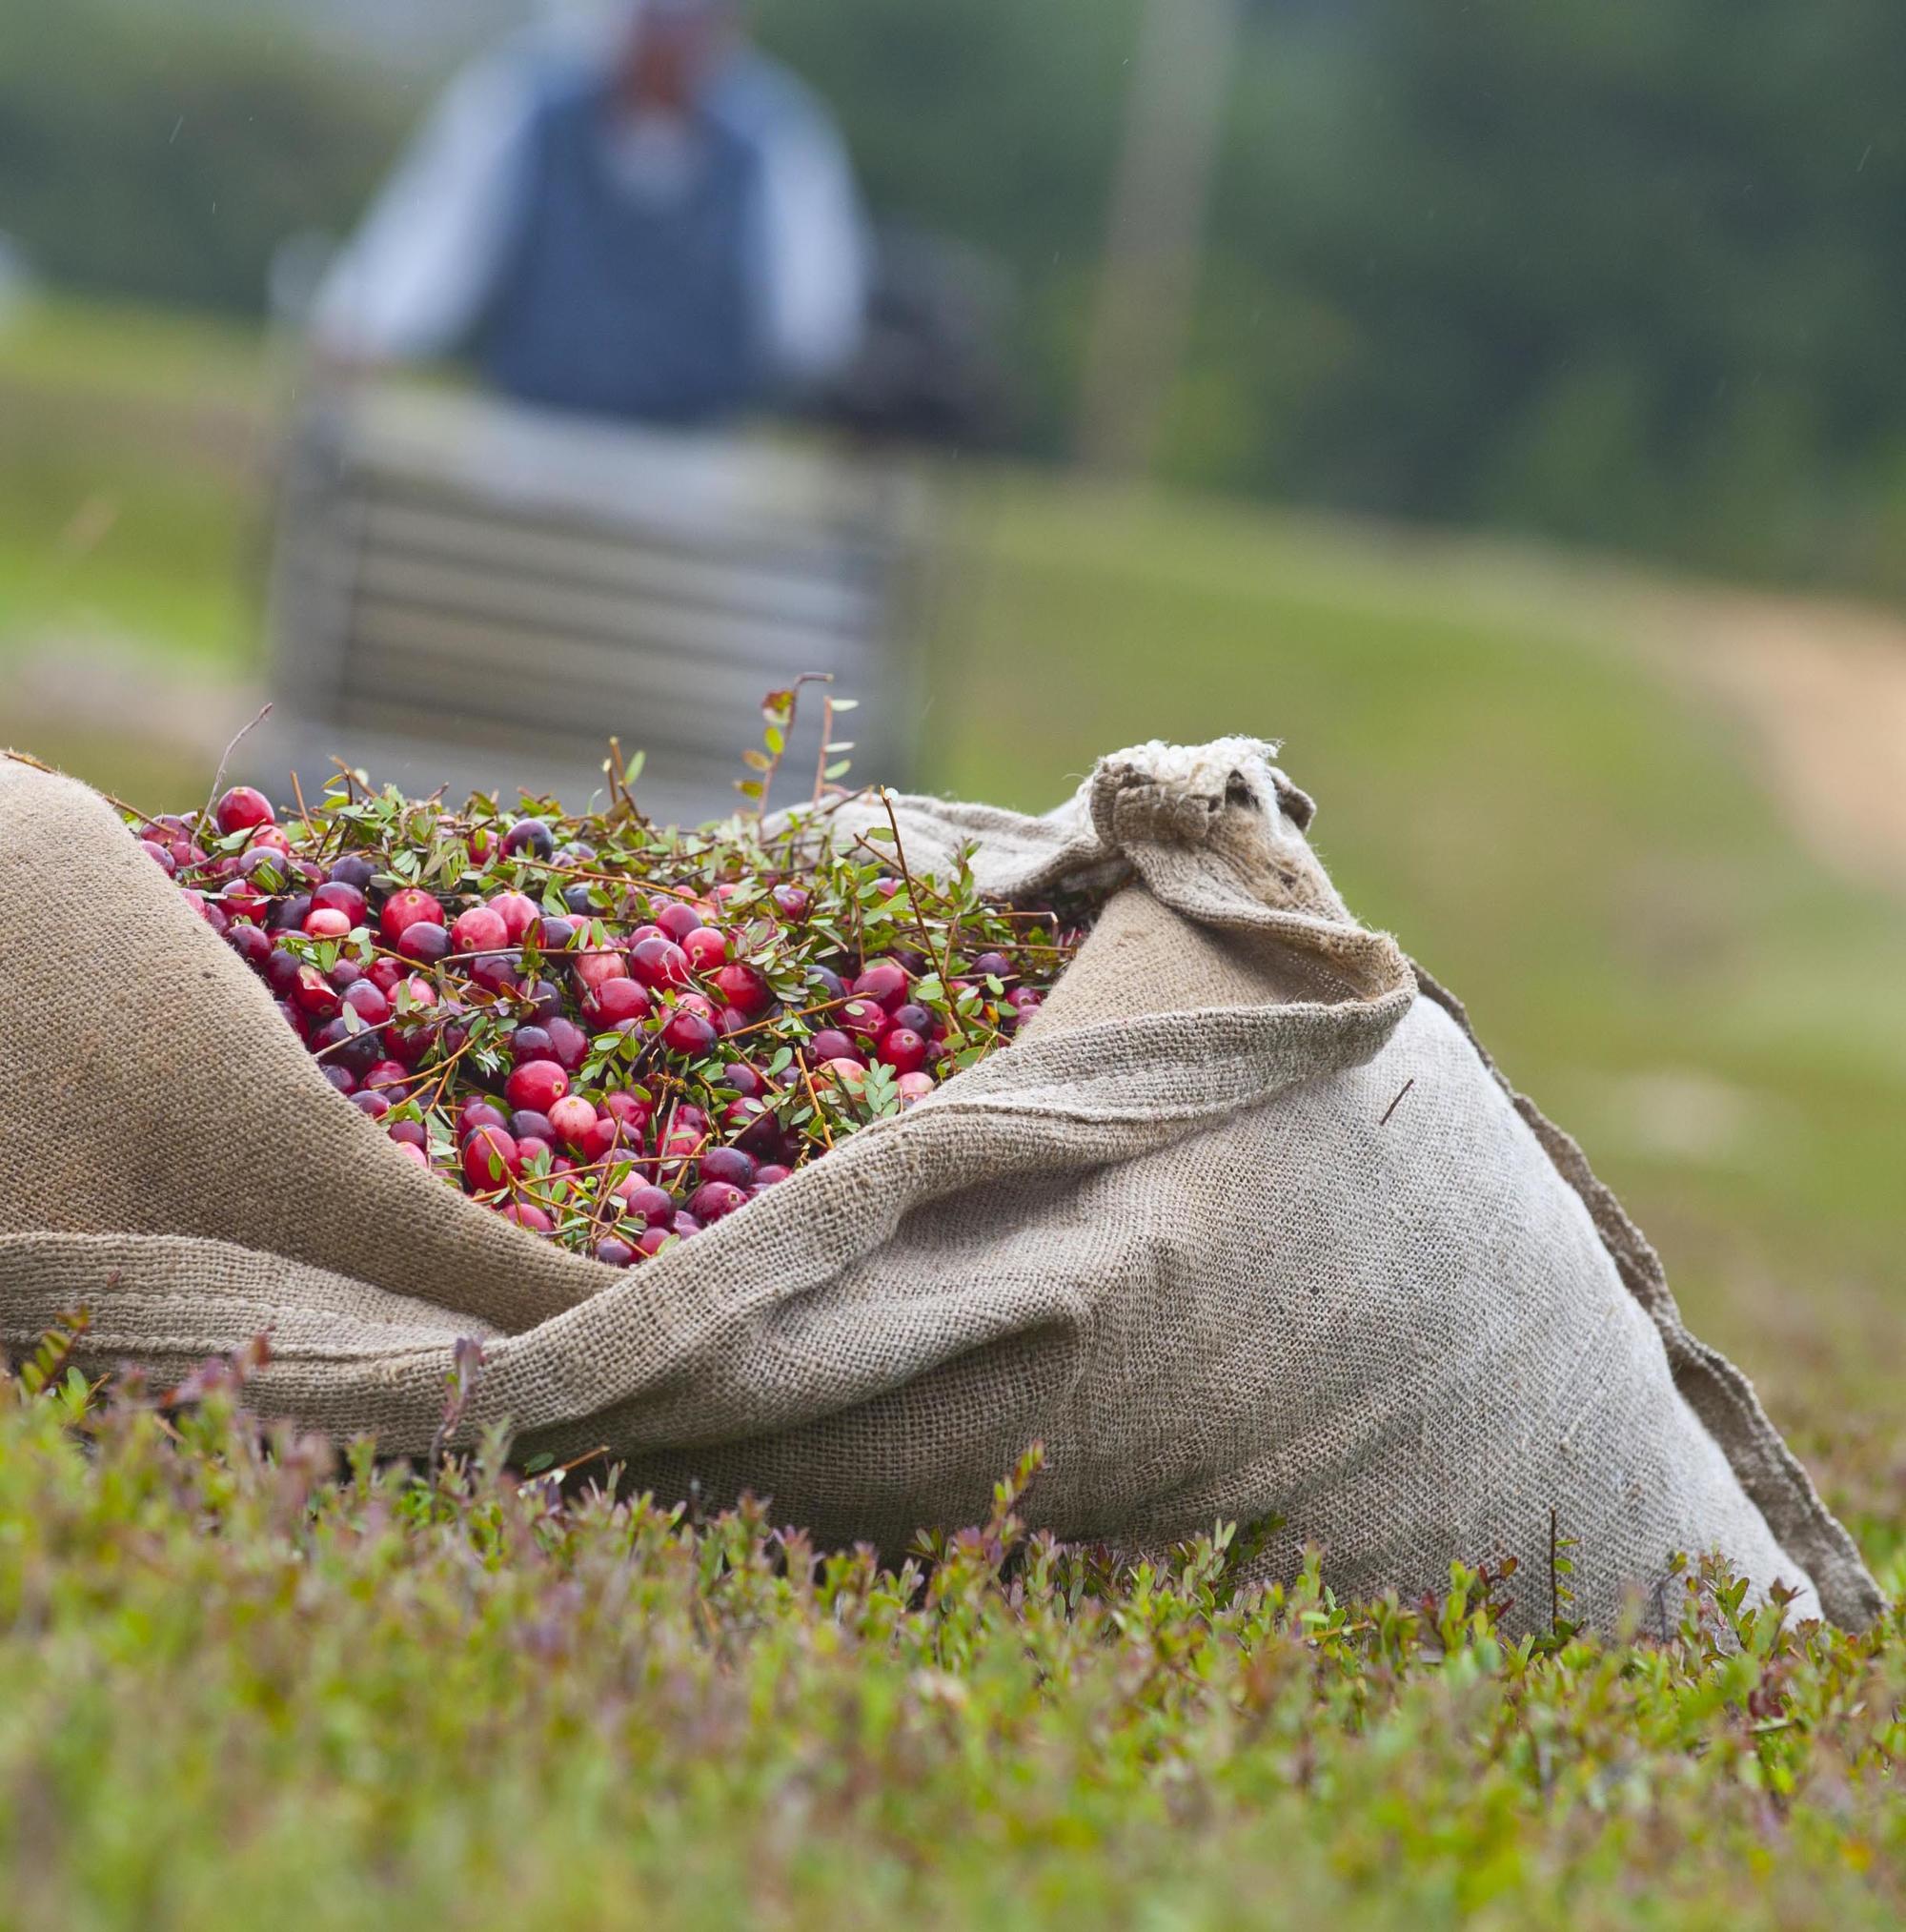 a sack of cranberries in a field